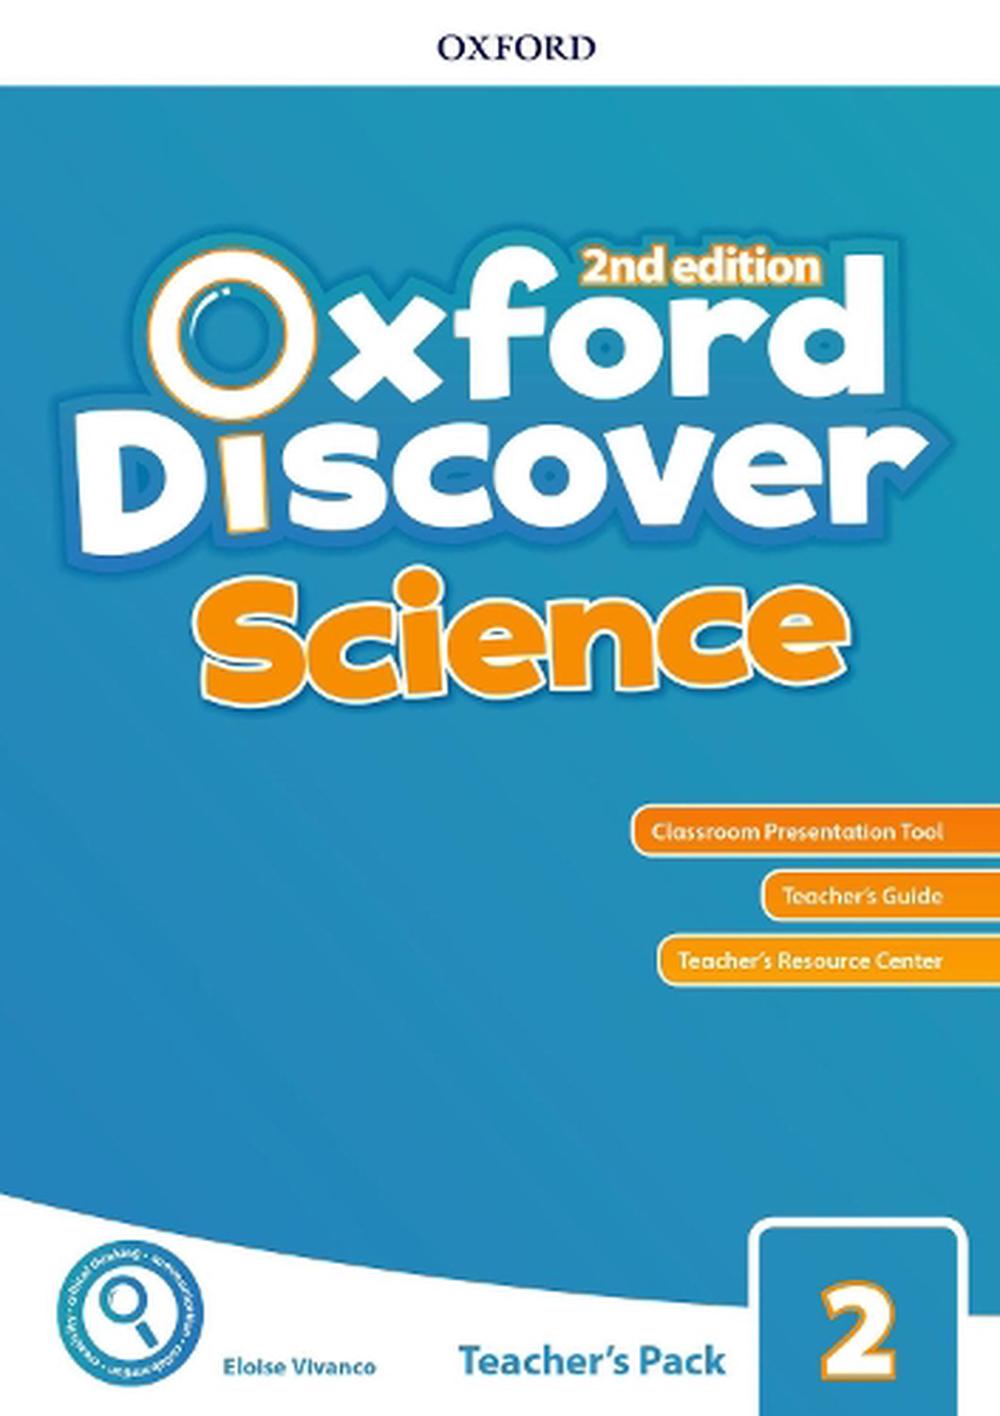 Book　Oxford　Discover　Pack　online　at　by　Oxford　Editor,　Level　Science:　9780194056755　The　Nile　2:　Merchandise,　Teacher's　Buy